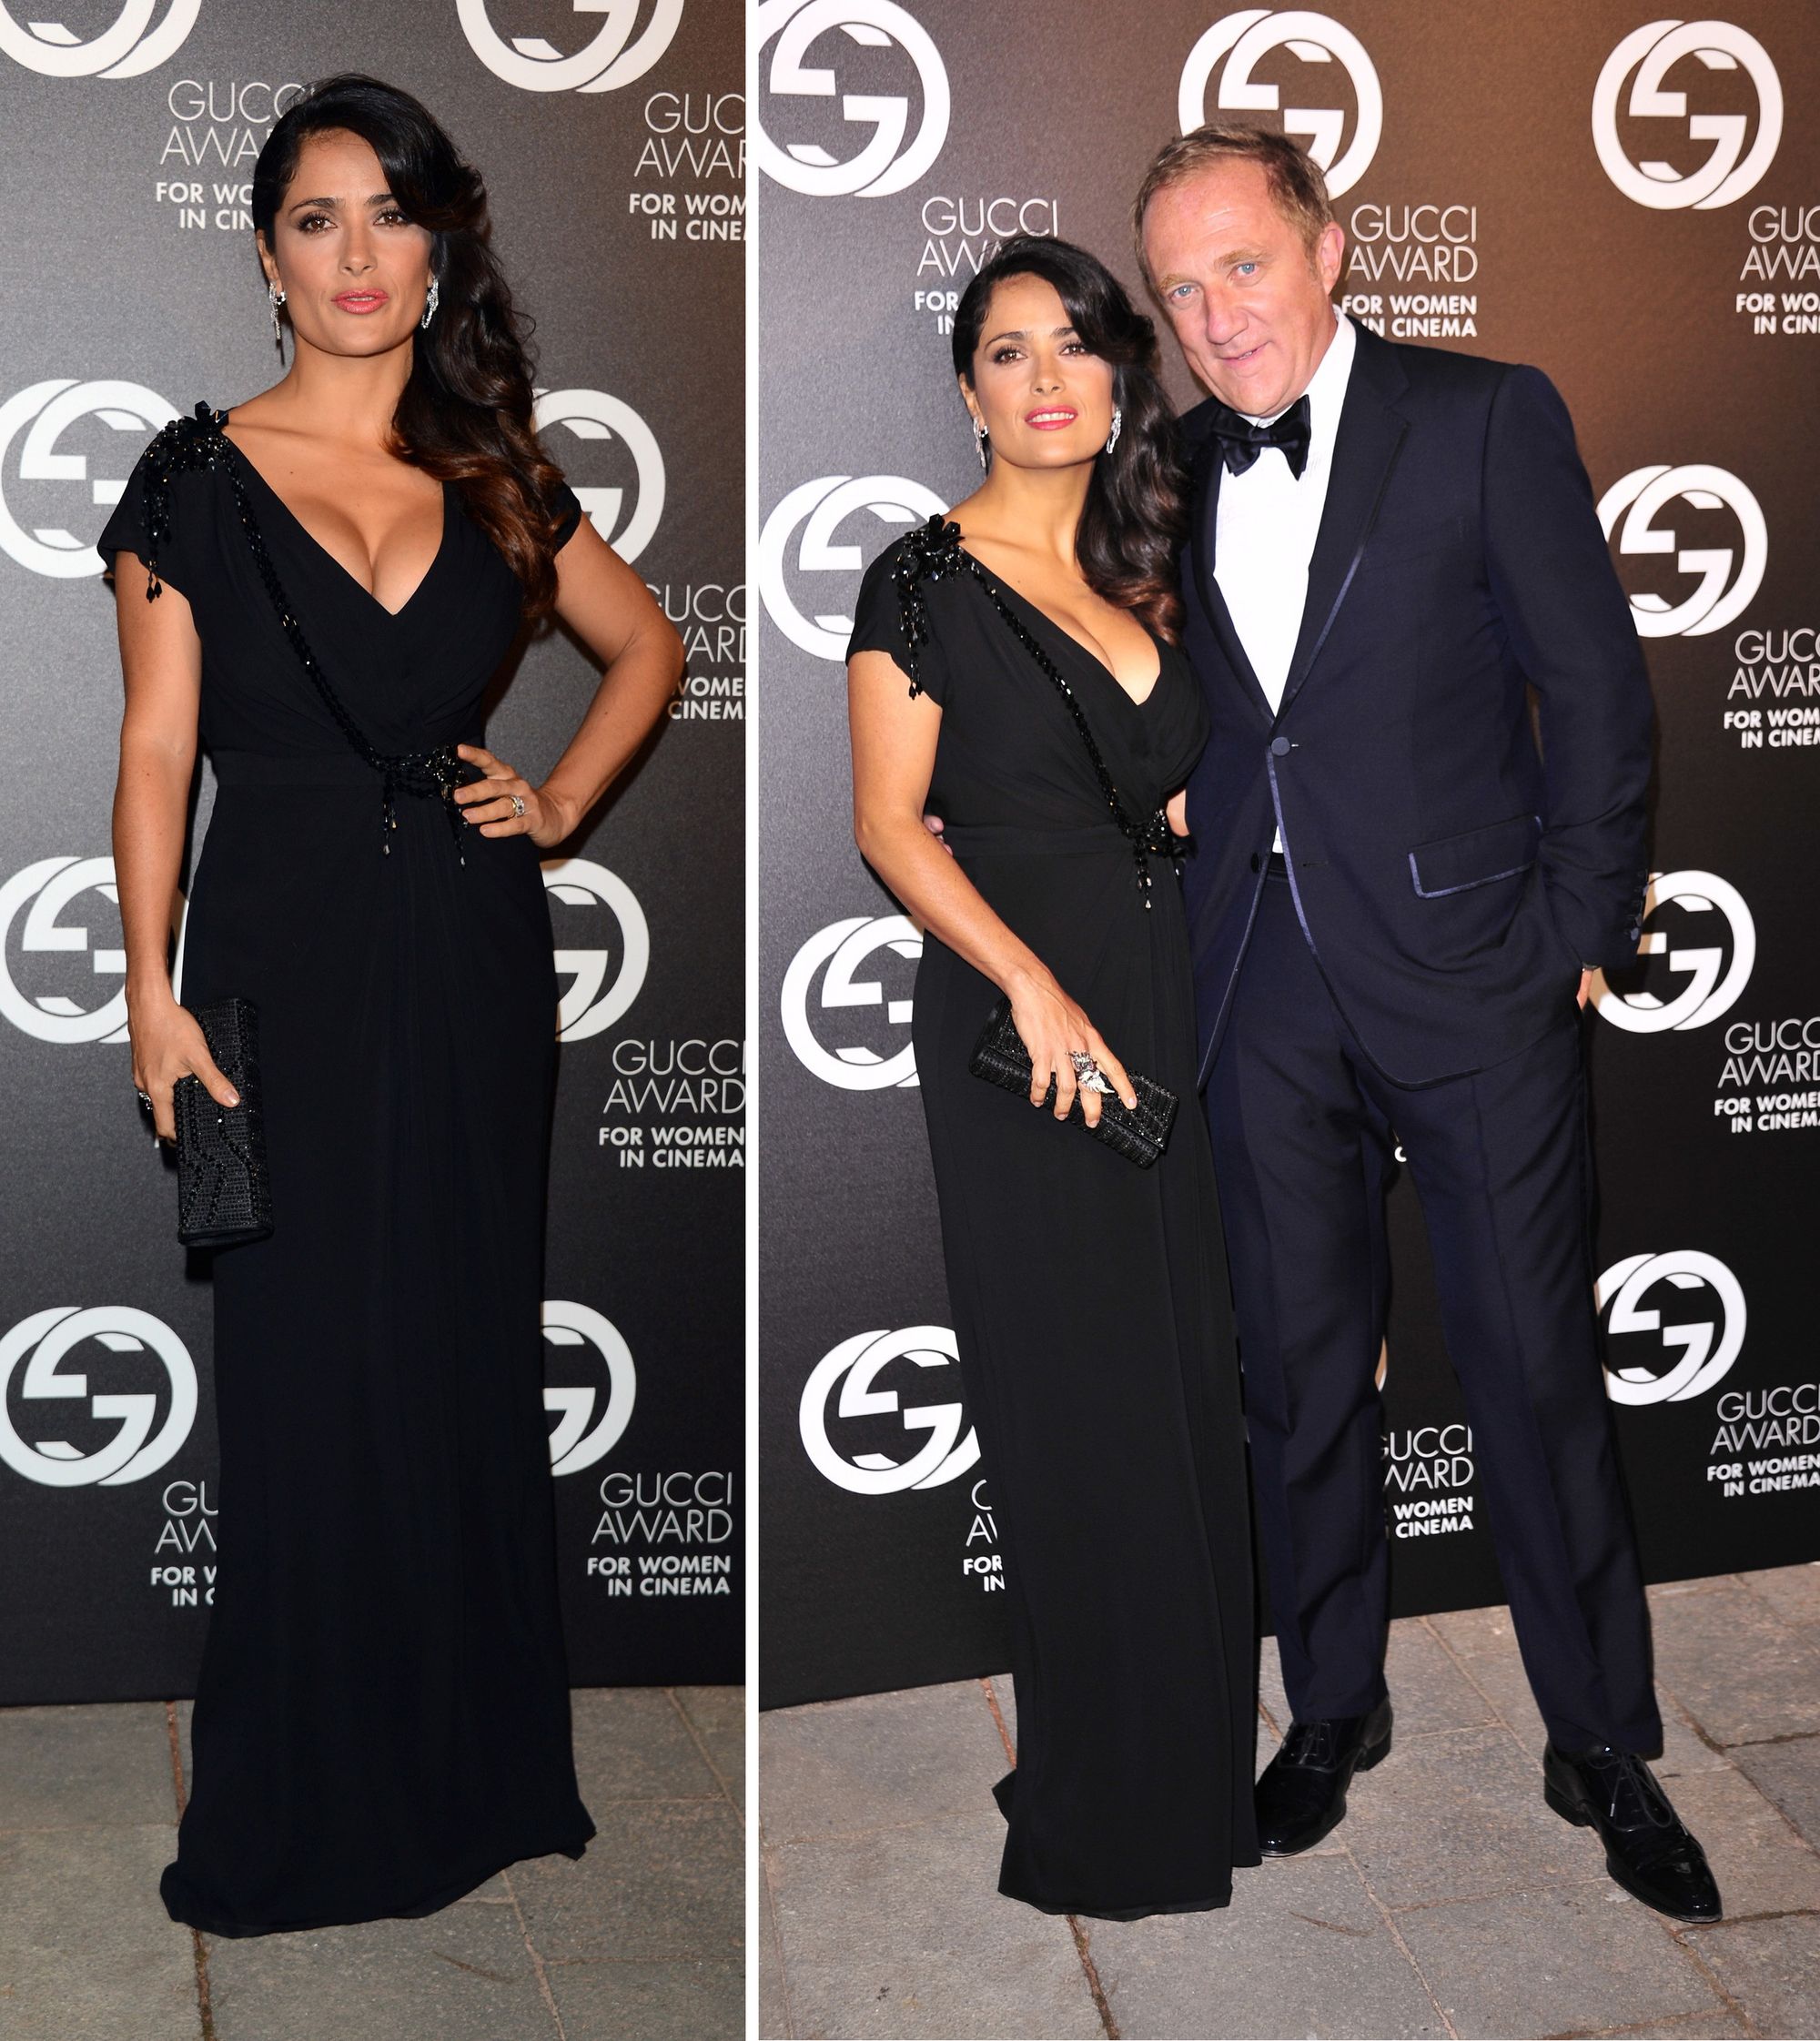 Salma Hayek-Pinault with husband François-Henri Pinault, also the CEO of the PPR Group that owns Gucci (Photo courtesy | Gucci/Getty Images)